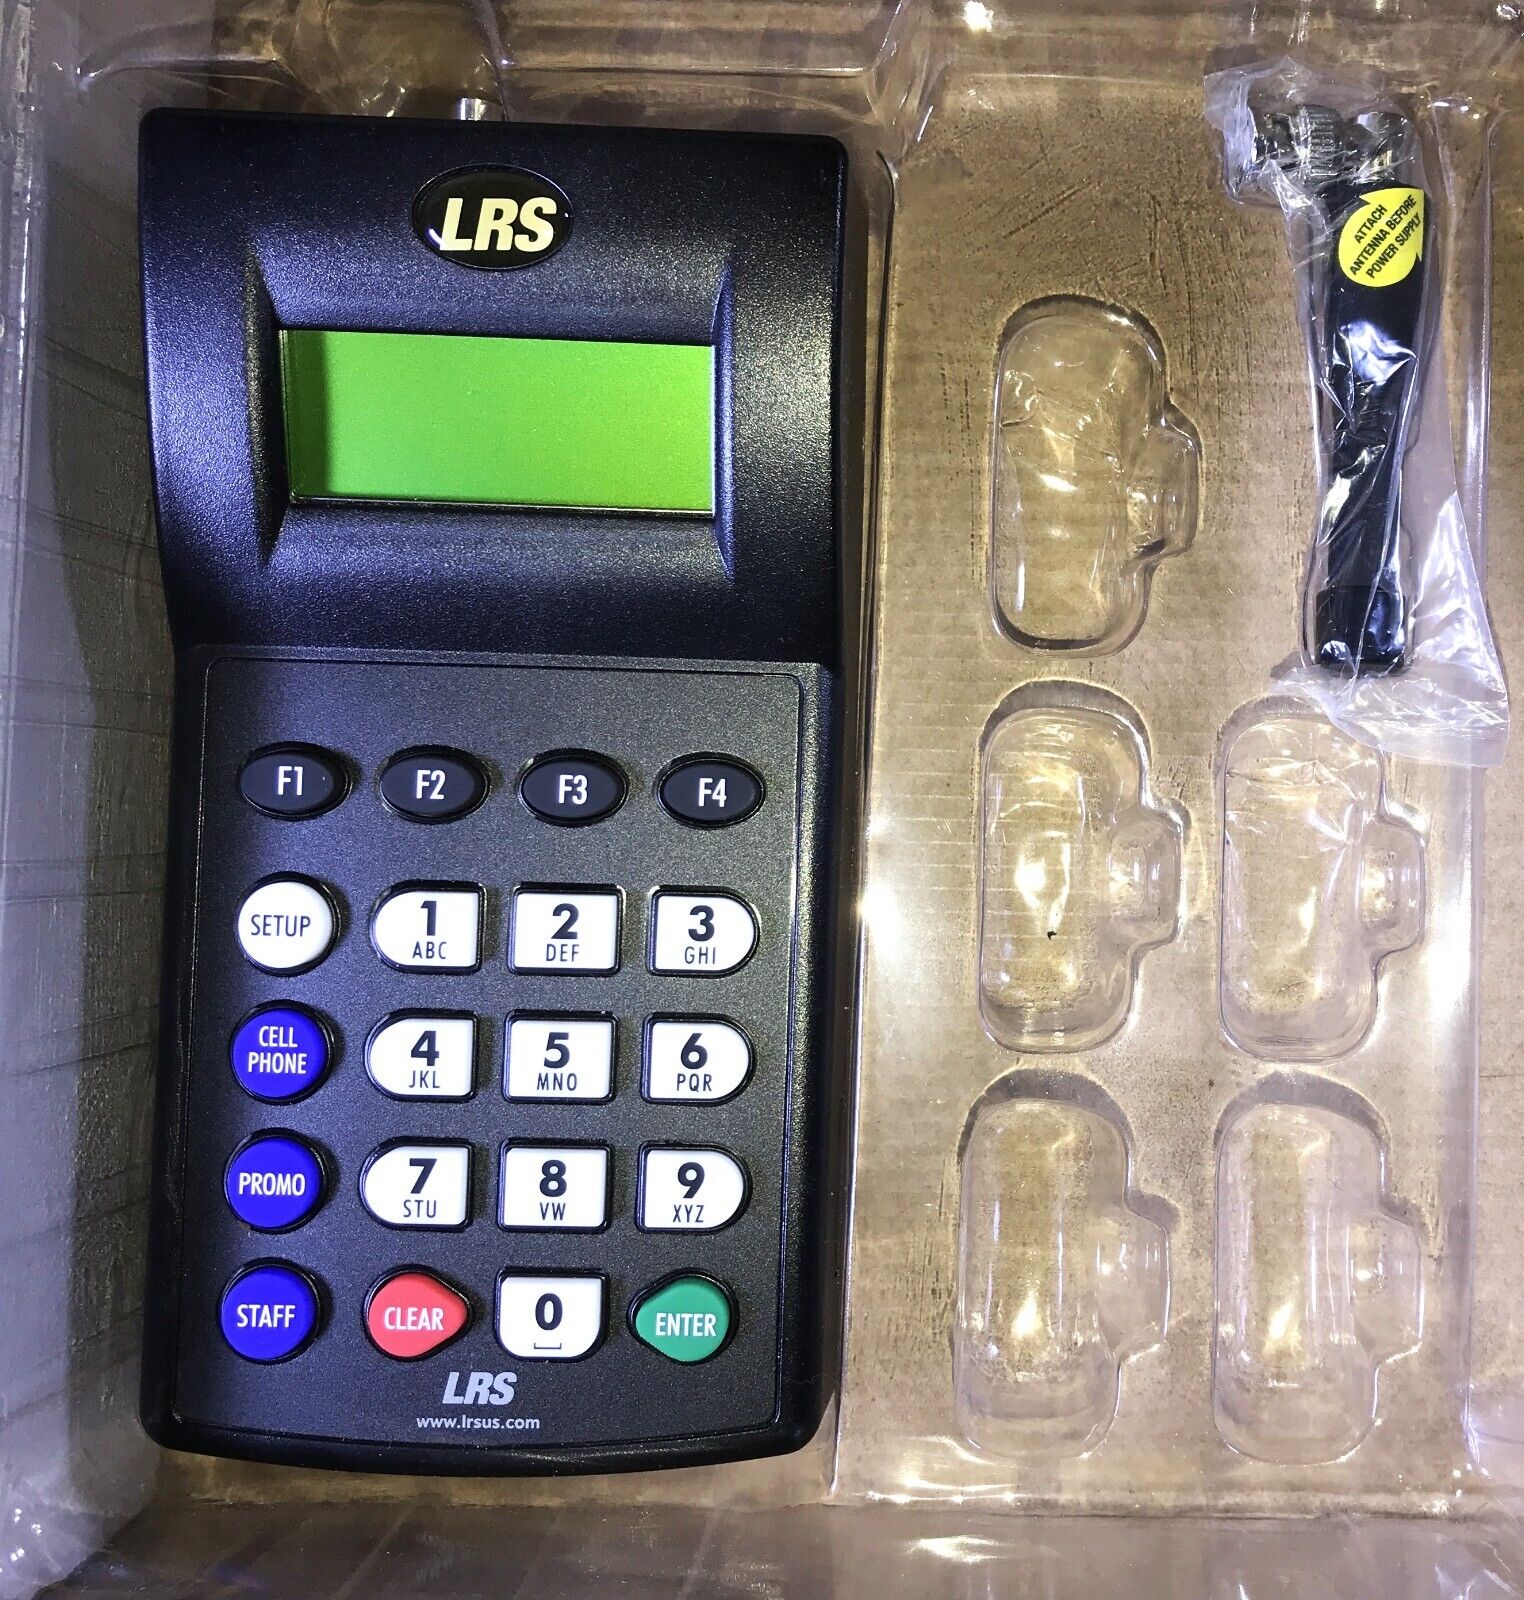 LRS Cell Phone Paging Transmitter - T7471 Freedom for both Server & Guest Pagers